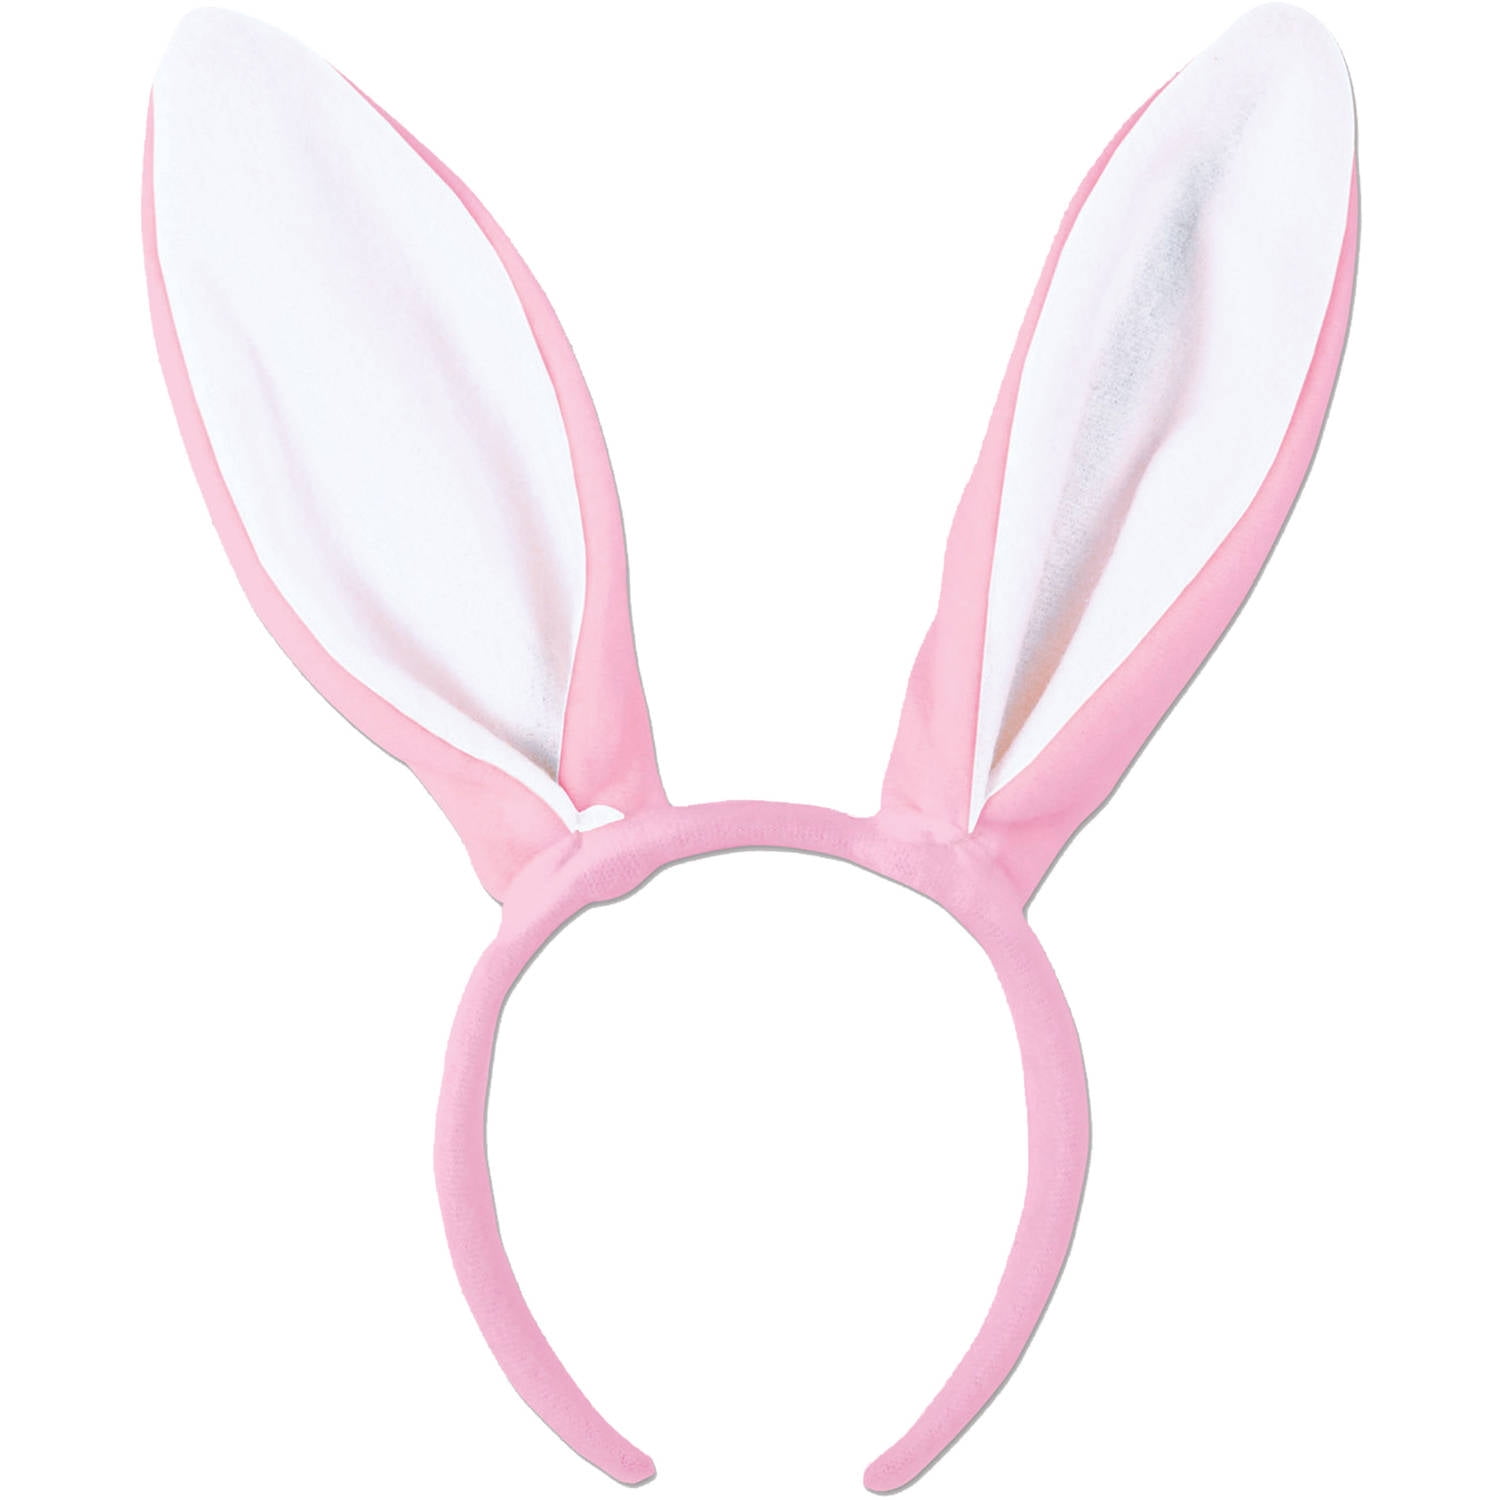 Details about   4 x Easter bunny Ears  soft touch one size fits most 28cm x 28cm 